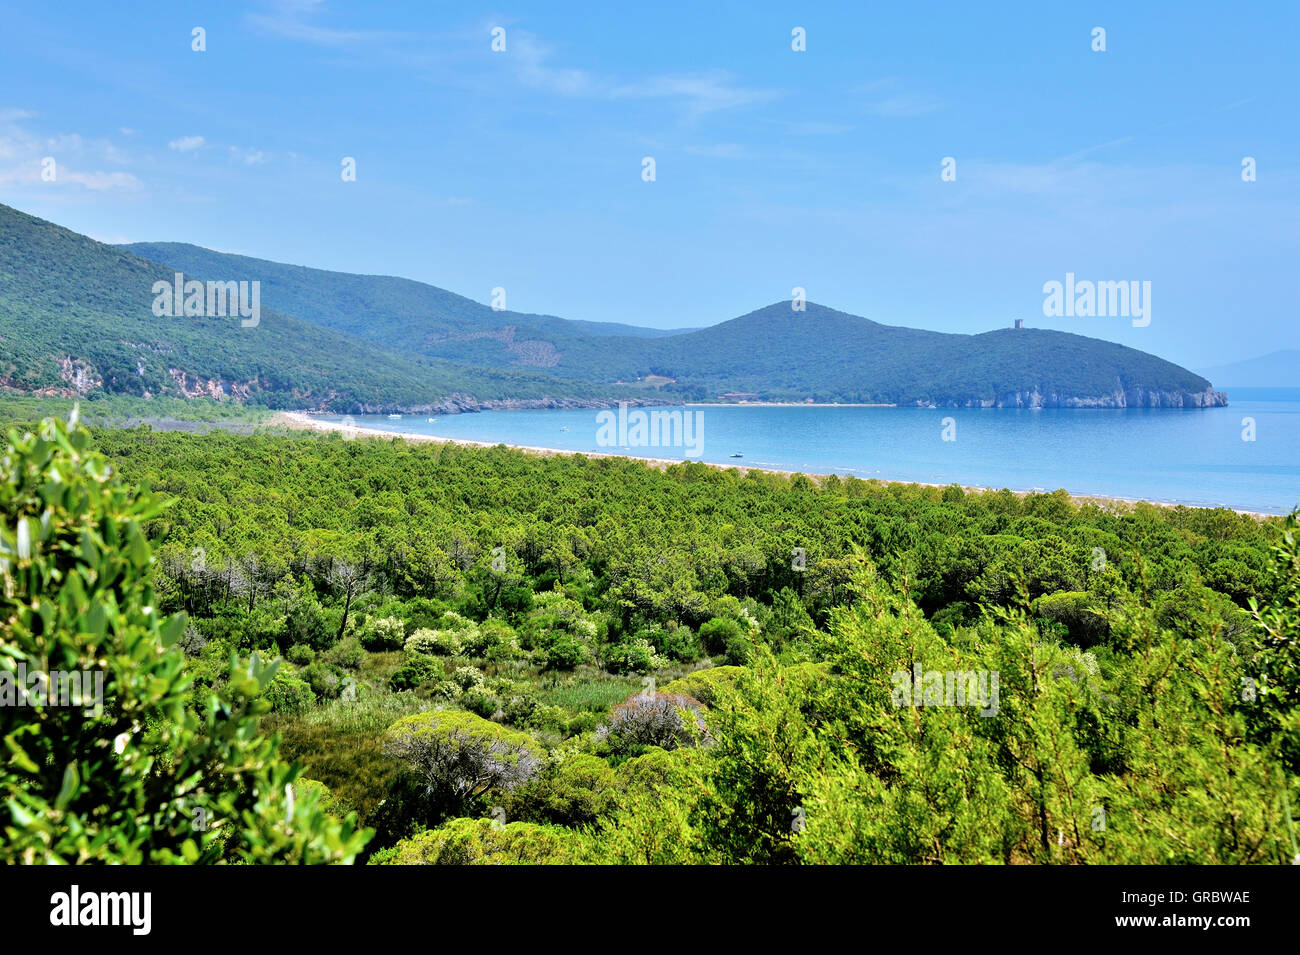 Typical Landscape Of Maremma With Watch Towers, Southern Tuscany, Acient Farming Land, Conquered Back By Nature, Italy Stock Photo